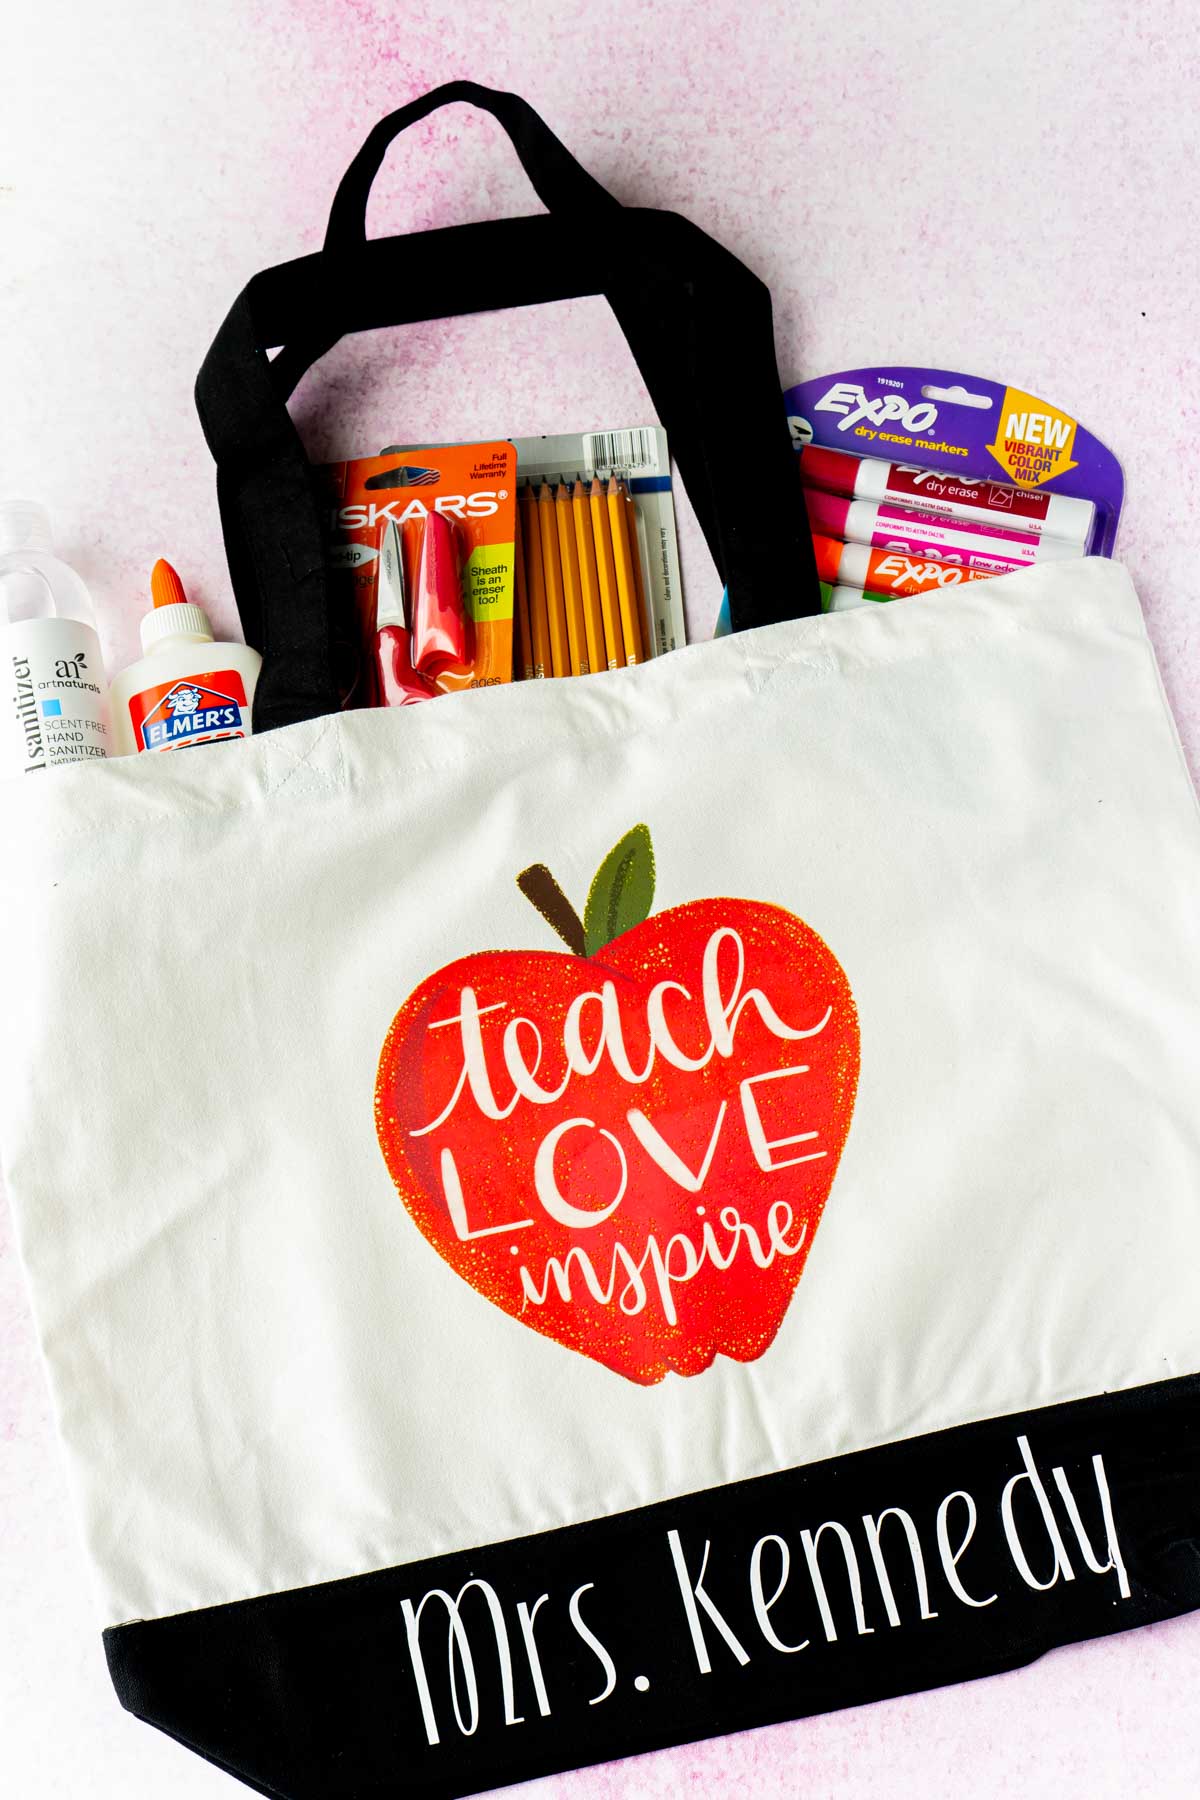 Kid-Colored Tote Bags with Cricut Explore Air 2 - An Easy DIY